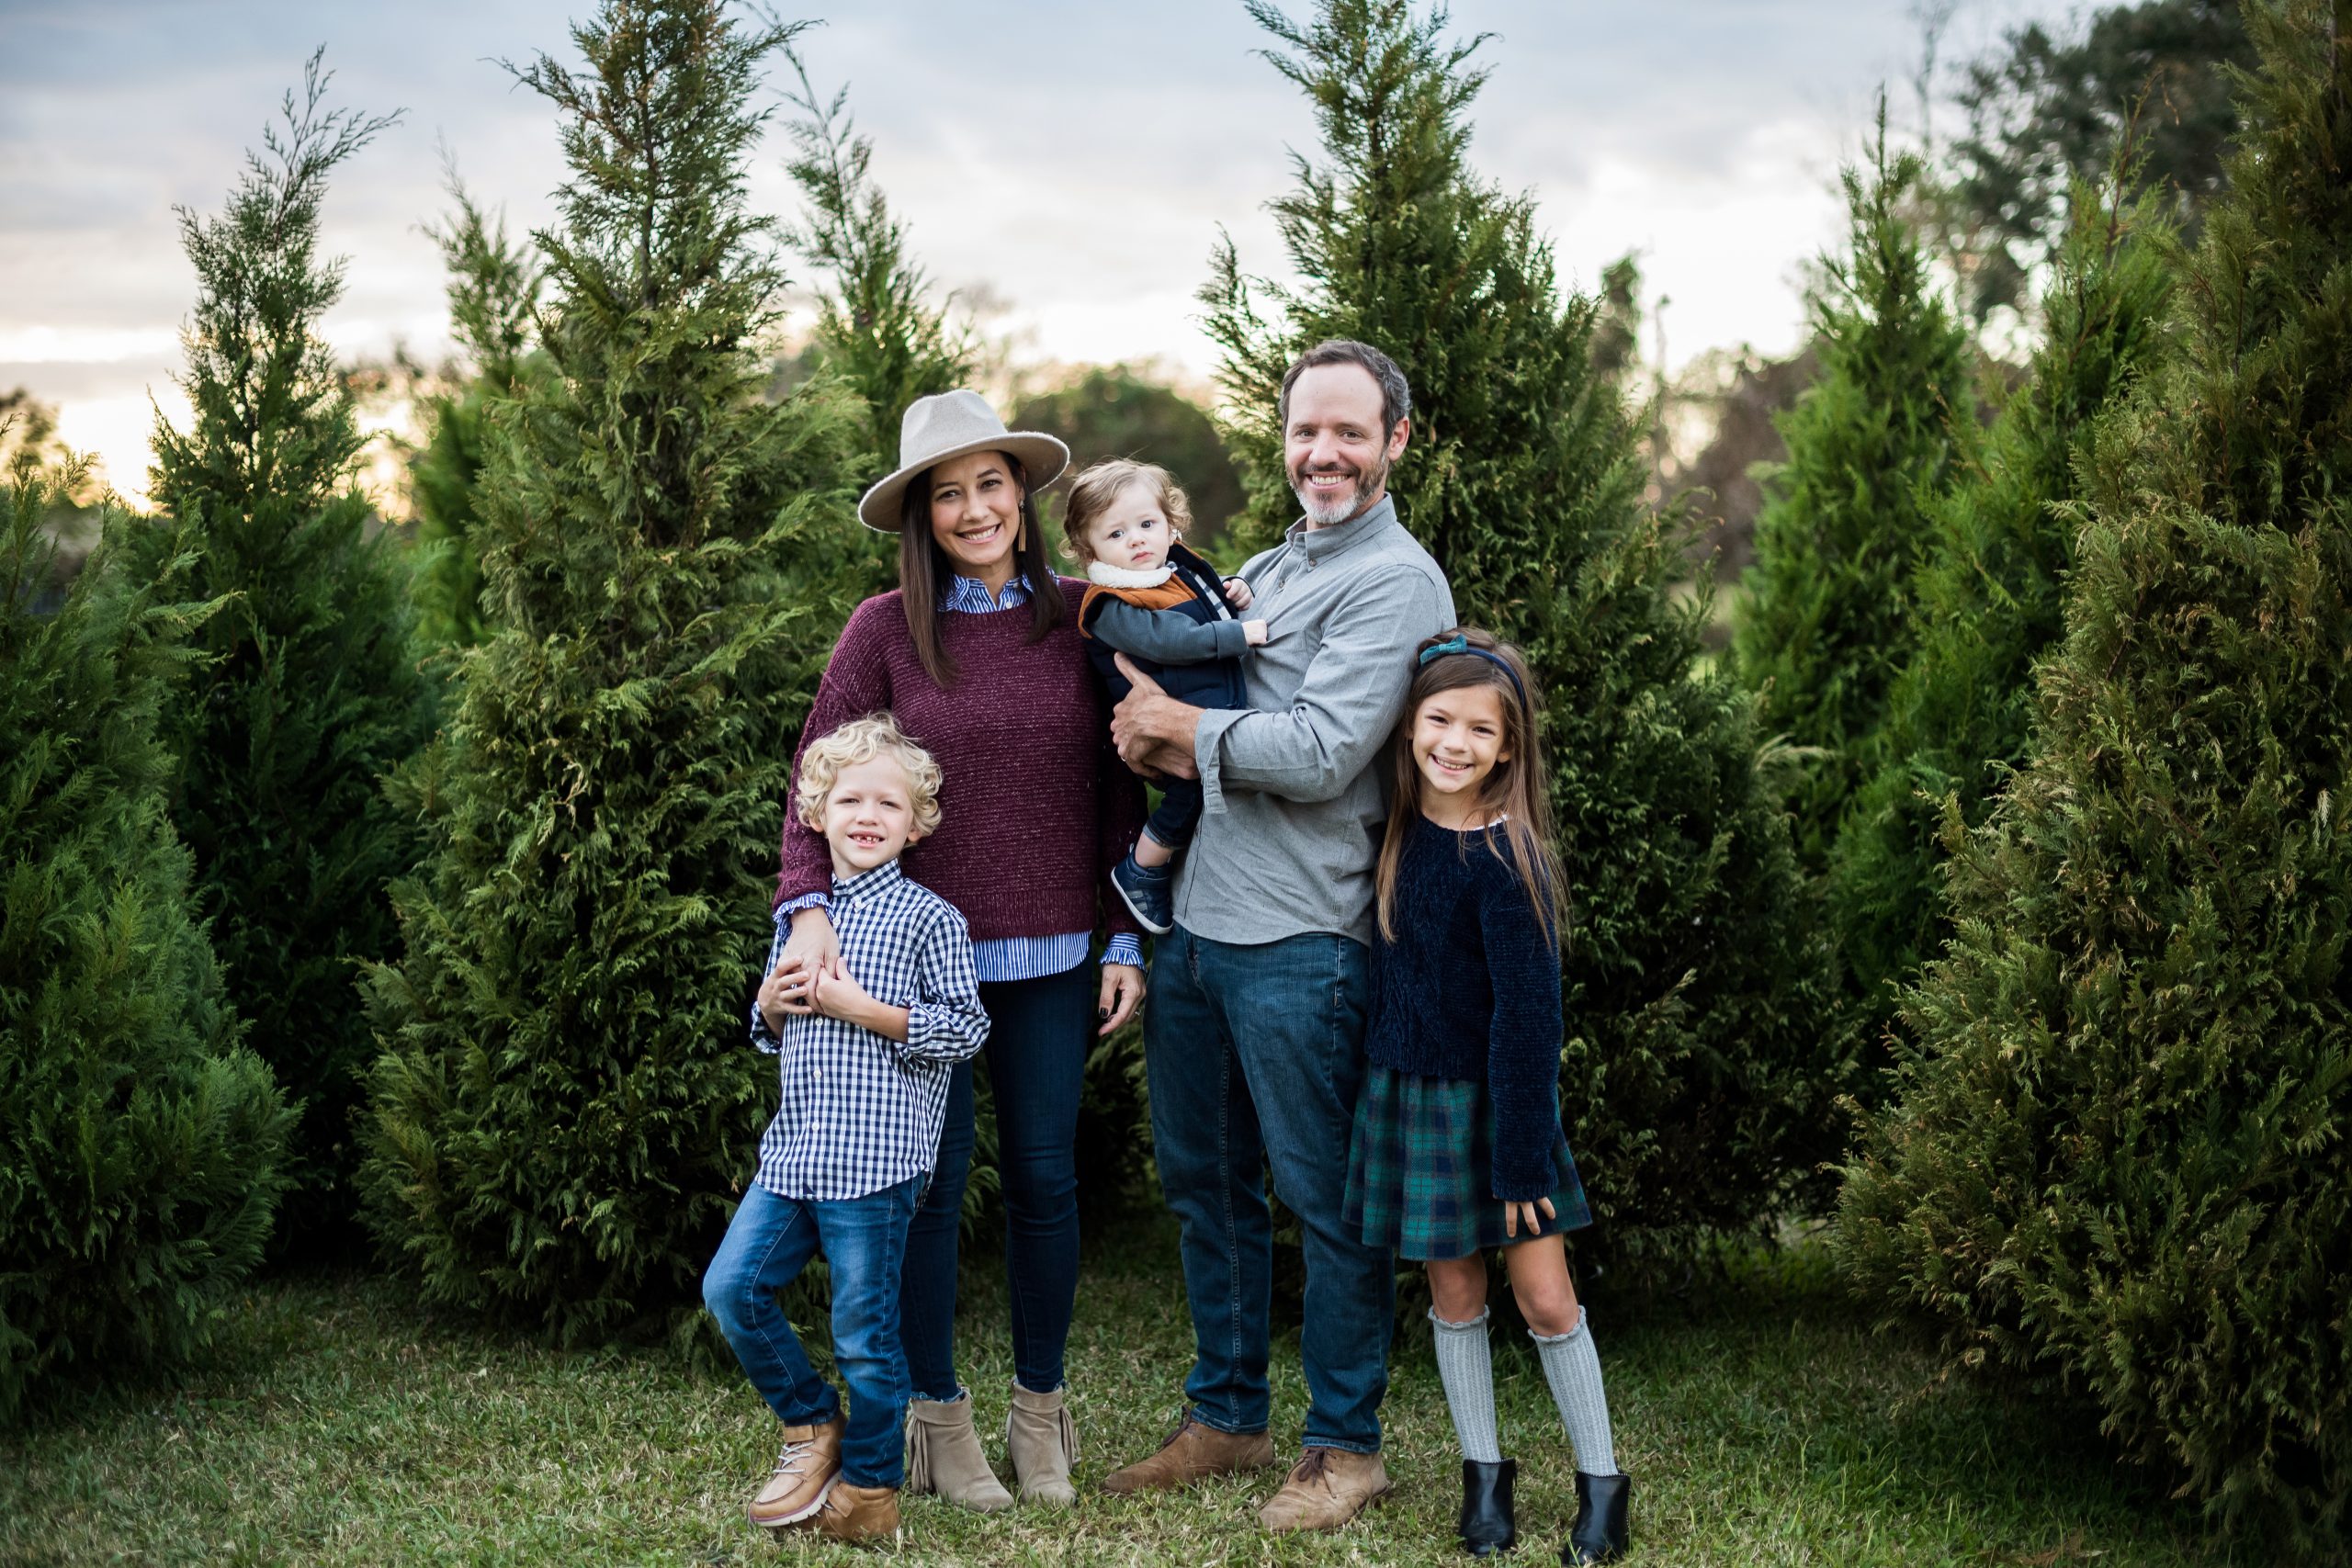 Where to Cut Down Your Own Christmas Tree in Louisiana